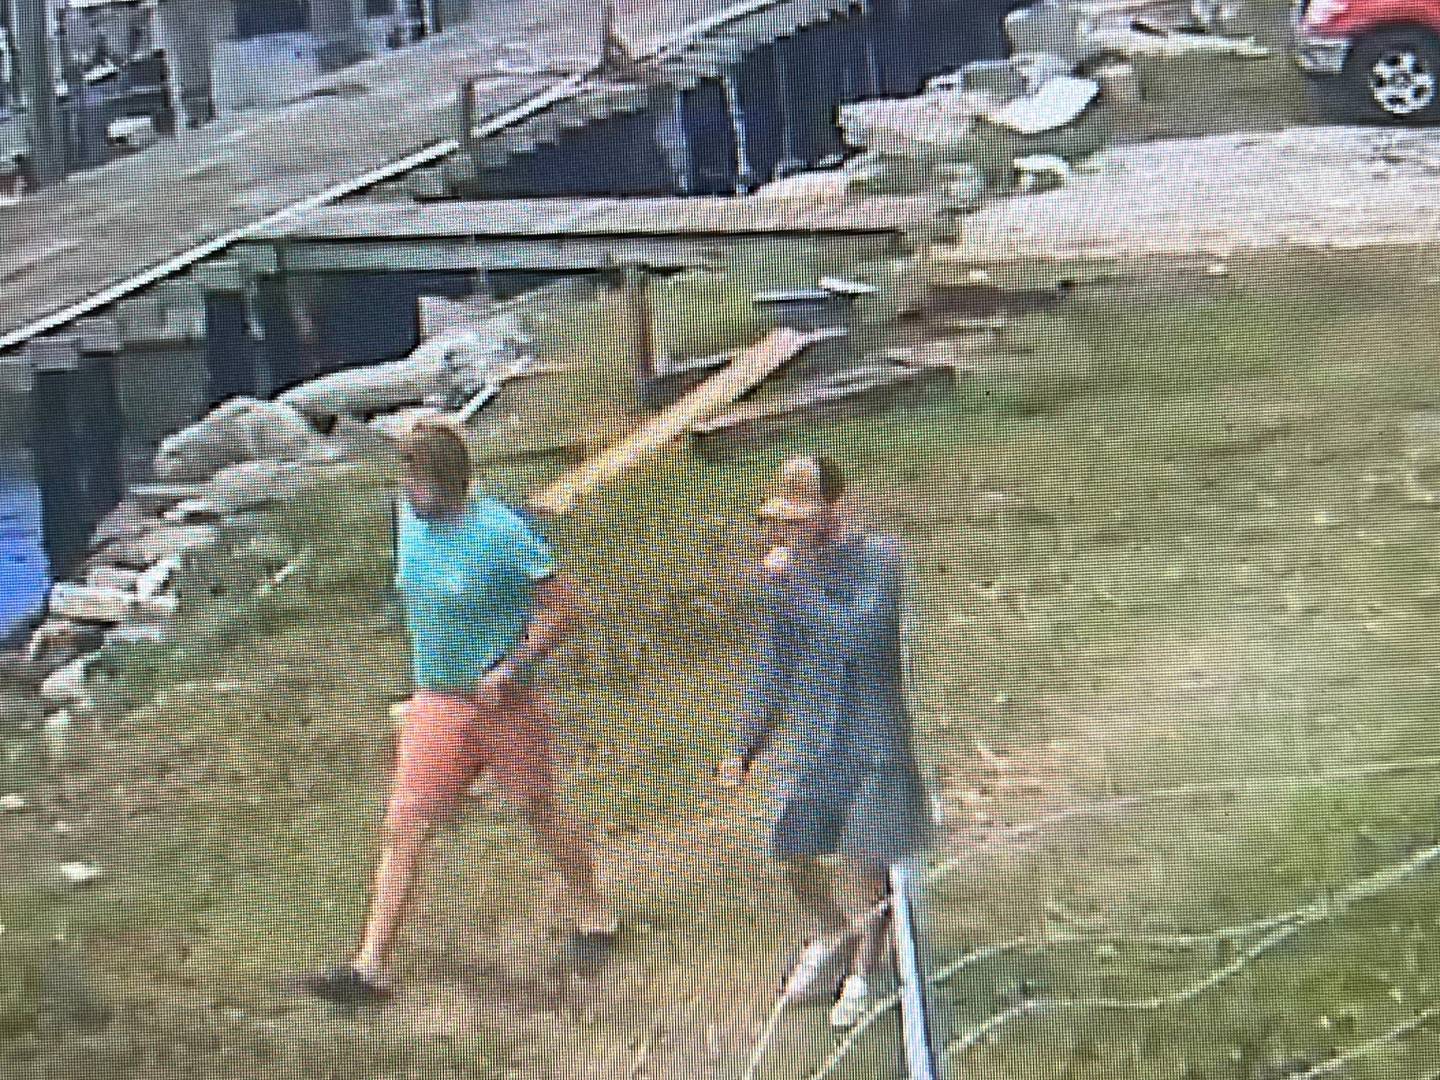 New surveillance pictures show the day the missing fishermen boarded the 31-foot fishing vessel, 'Carol Ann.'